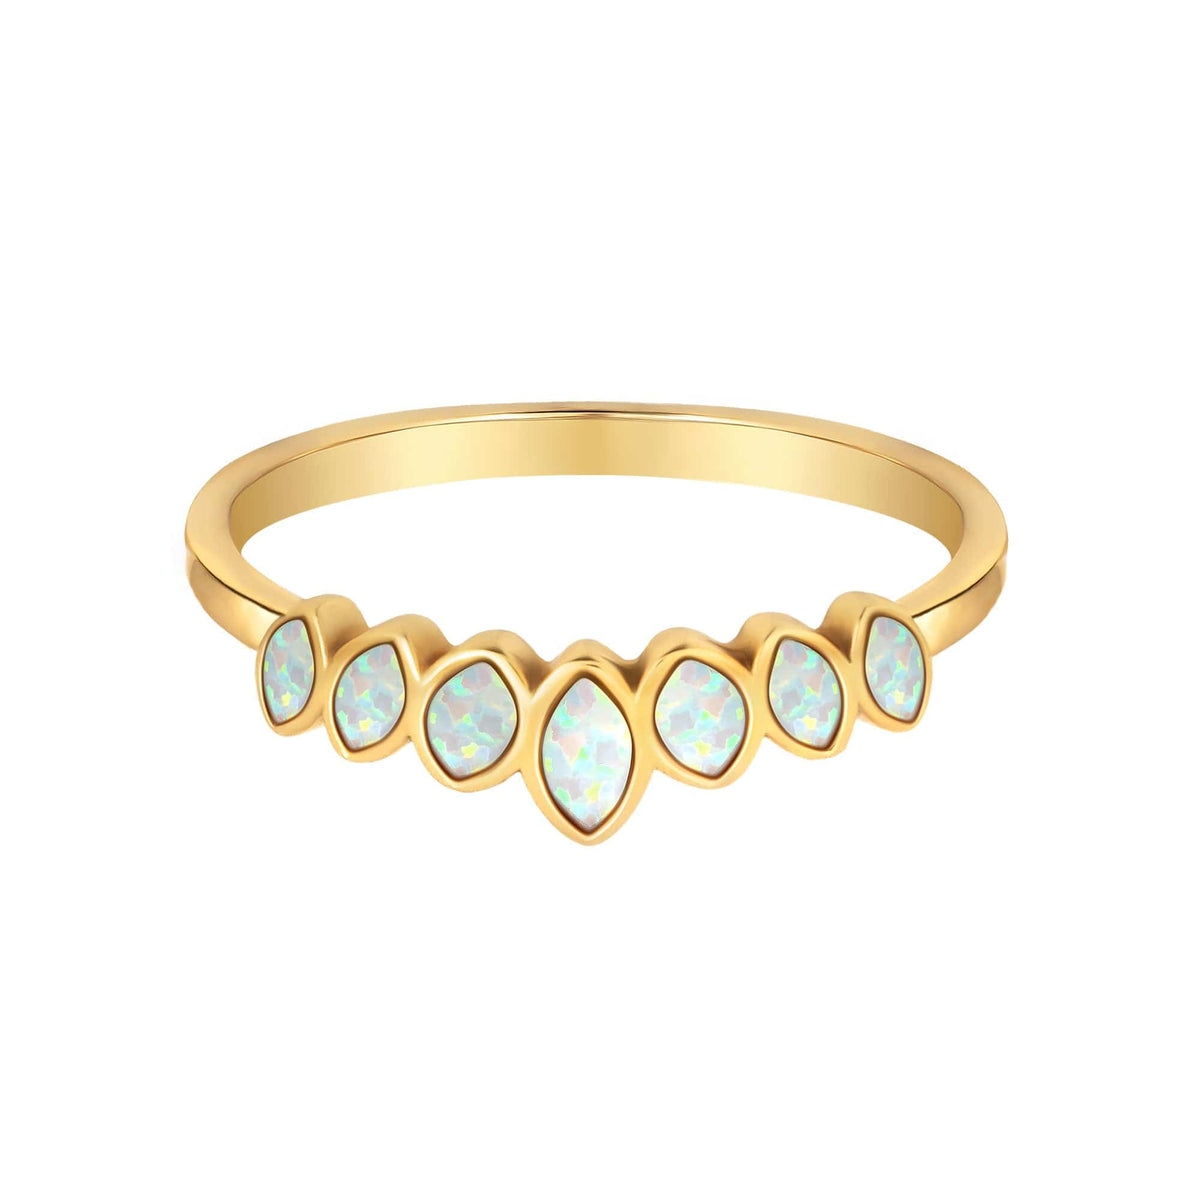 BohoMoon Stainless Steel Catalina Opal Ring Gold / US 6 / UK L / EUR 51 (small)